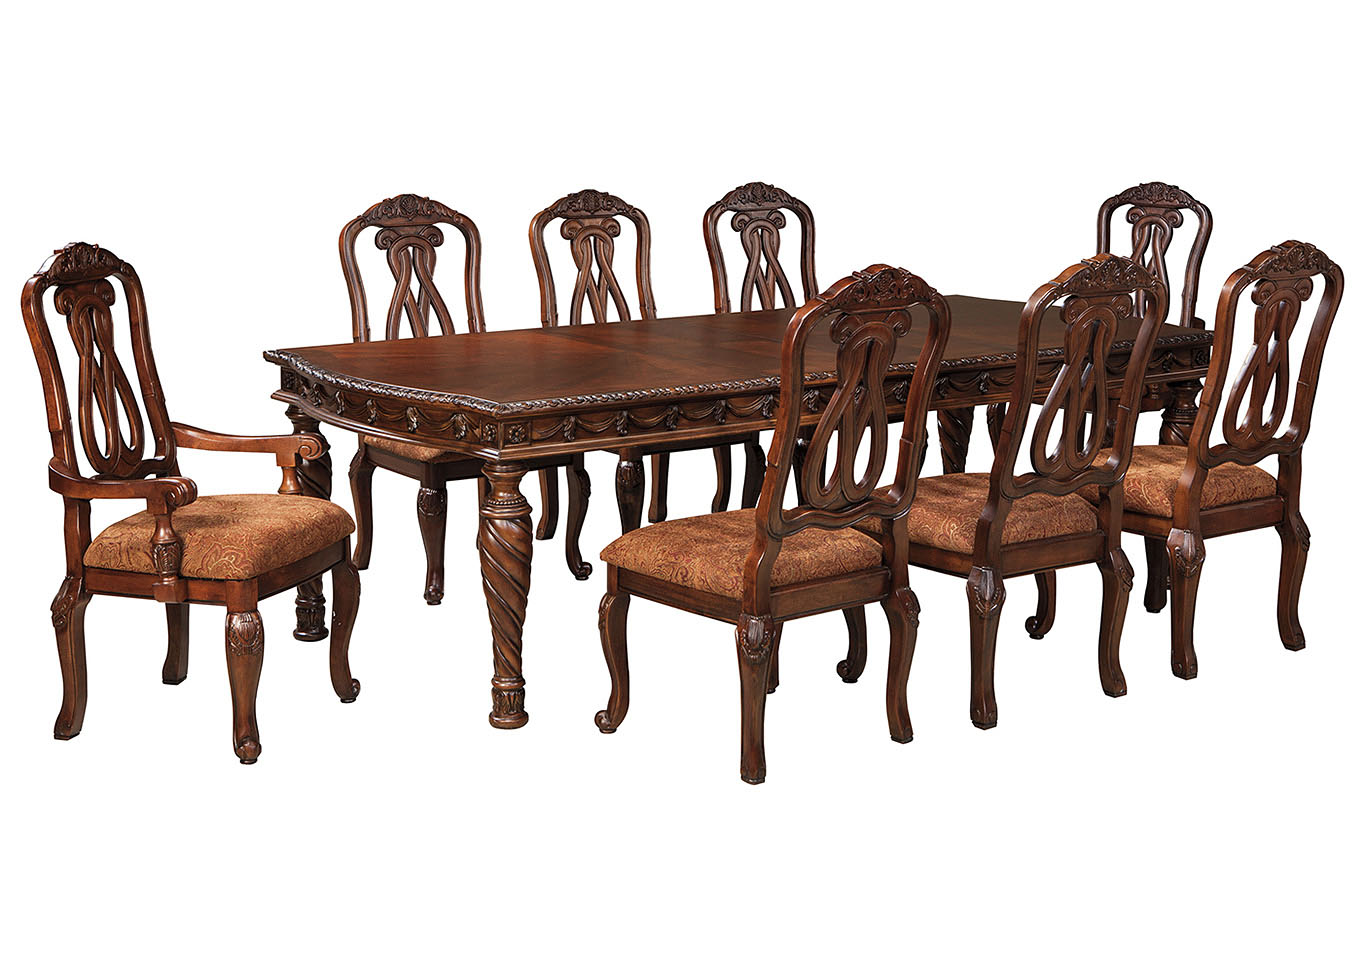 North Shore Dark Brown Rectangular Dining Table W 4 Side Chairs 2 Arm North Shore Dark Brown Rectangular Dining Table W 4 Side Chairs 2 Arm Chairs Sale 1959 99 Dimension Dining Uph Side Chair 2 Cn 24 75 D X44 38 H X23 13 W